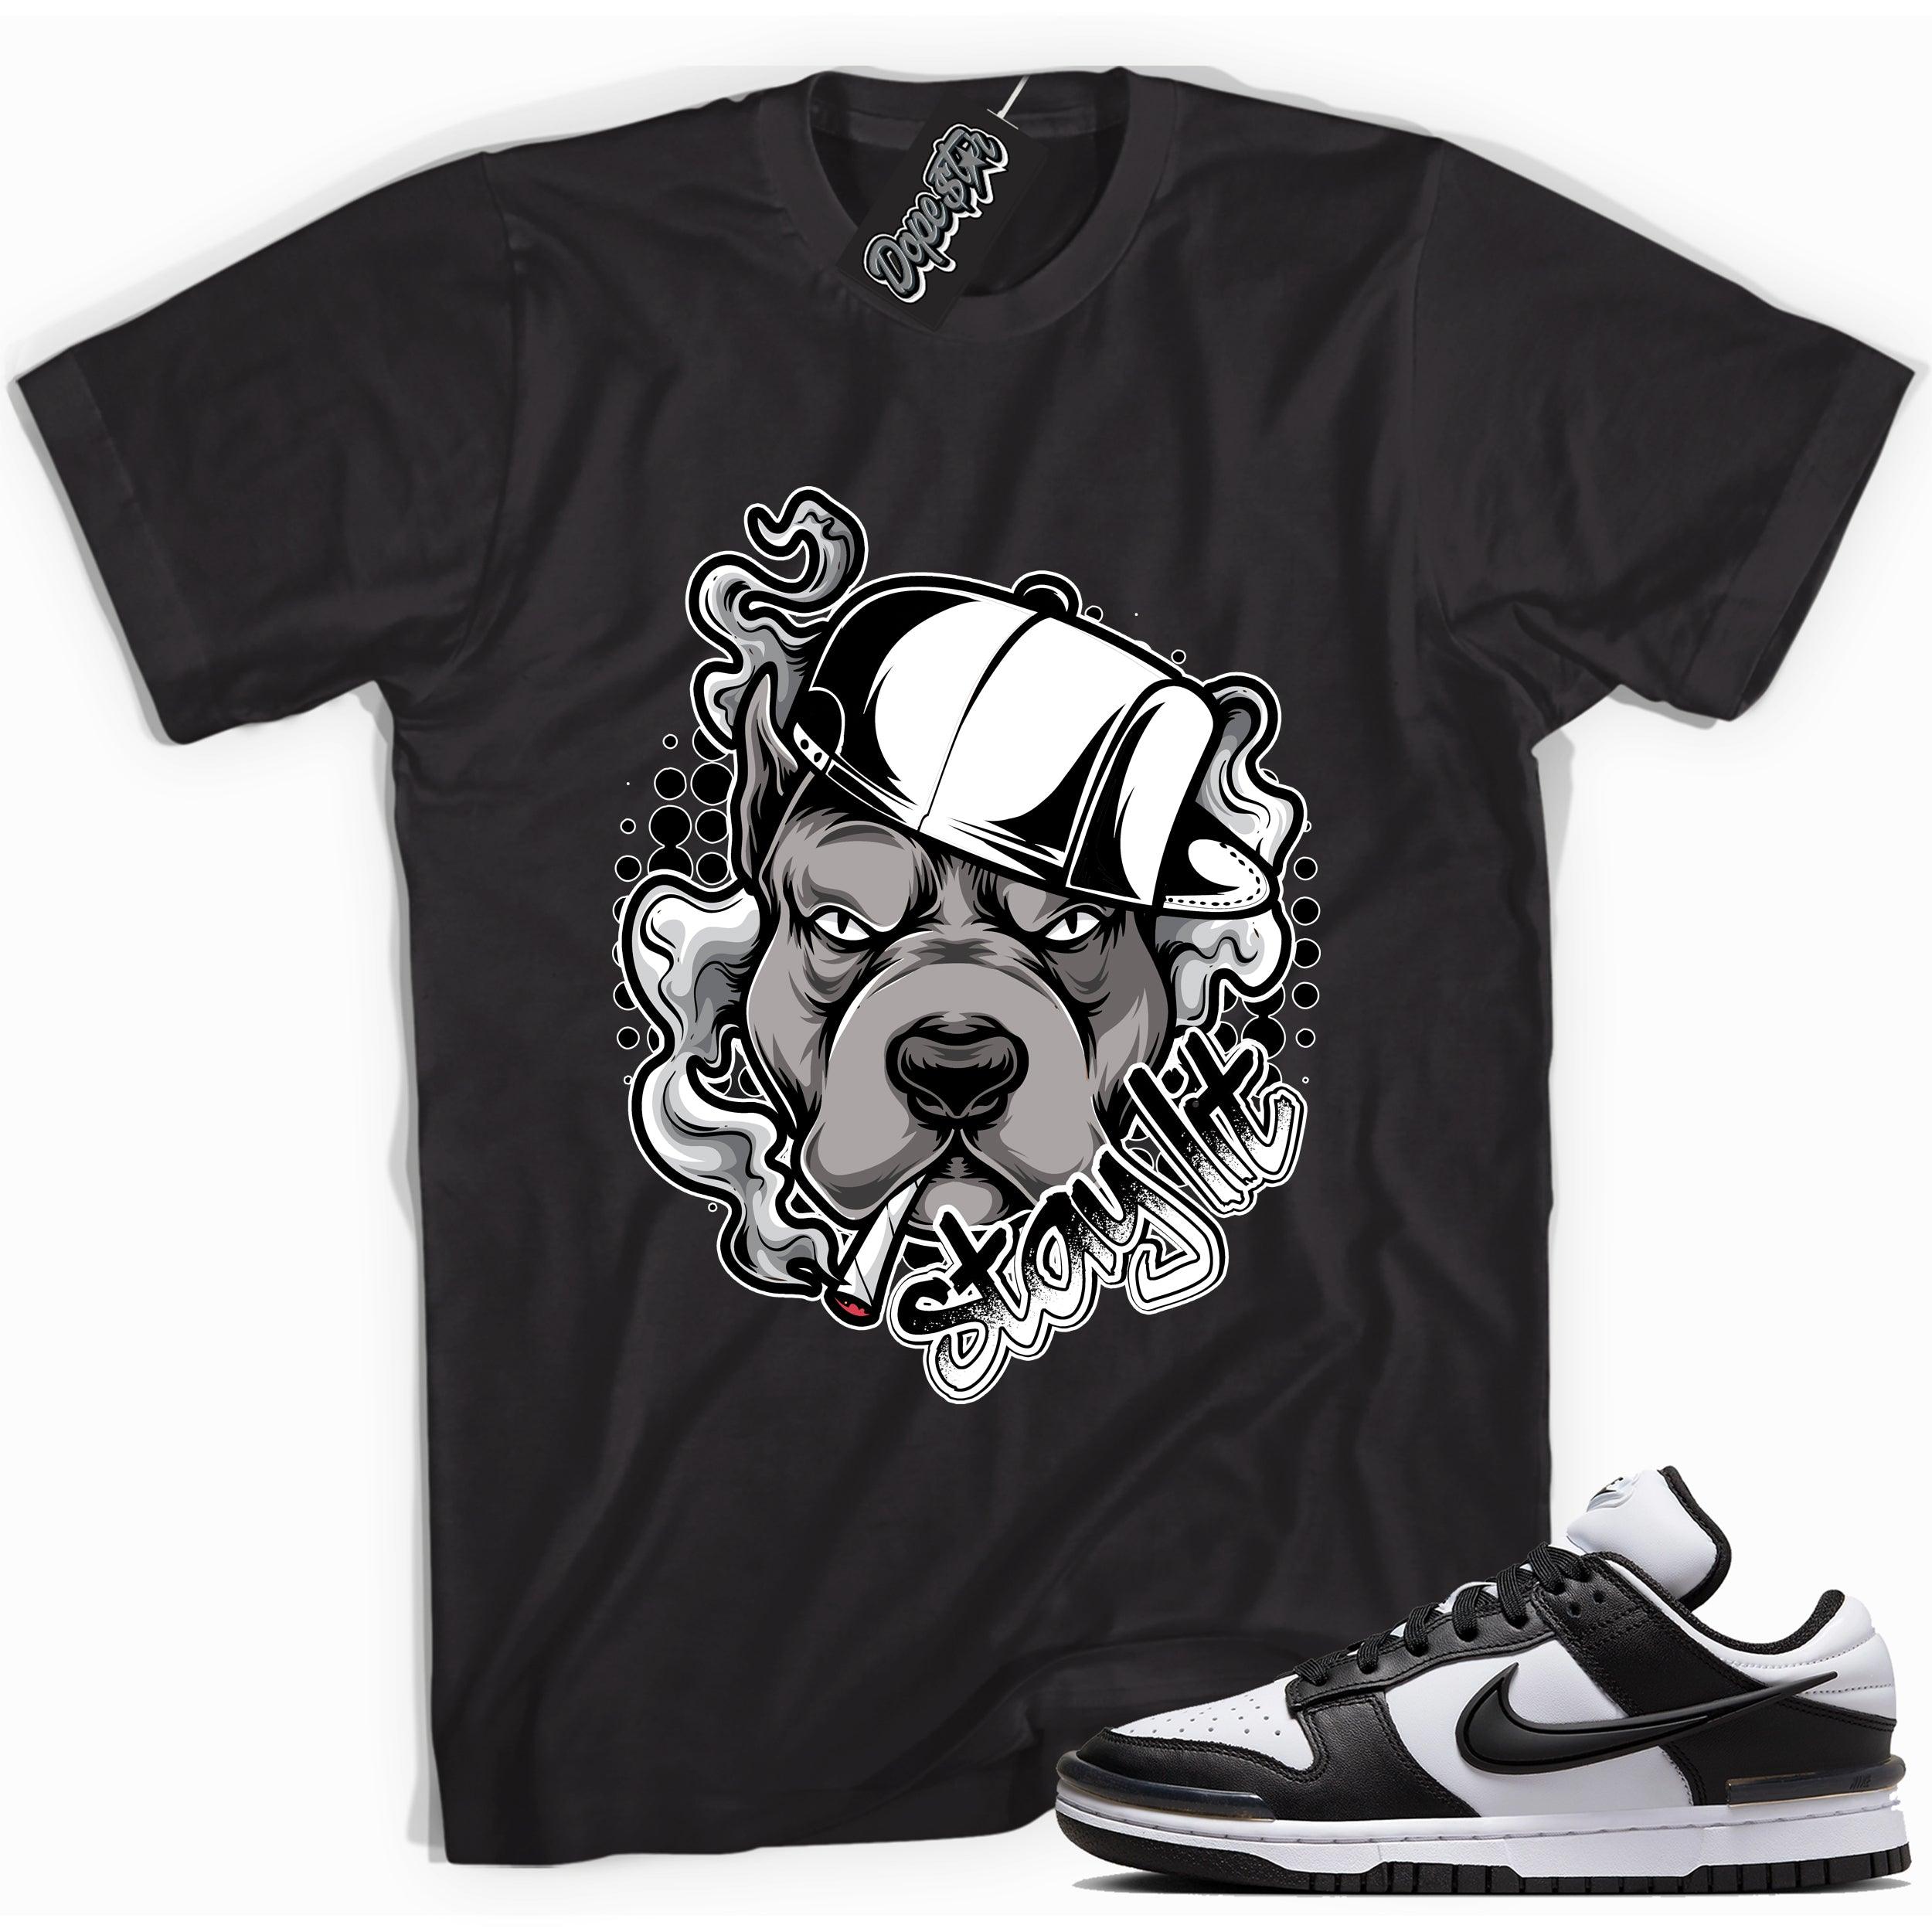 Cool black graphic tee with 'stay lit' print, that perfectly matches Nike Dunk Low Twist Panda sneakers.